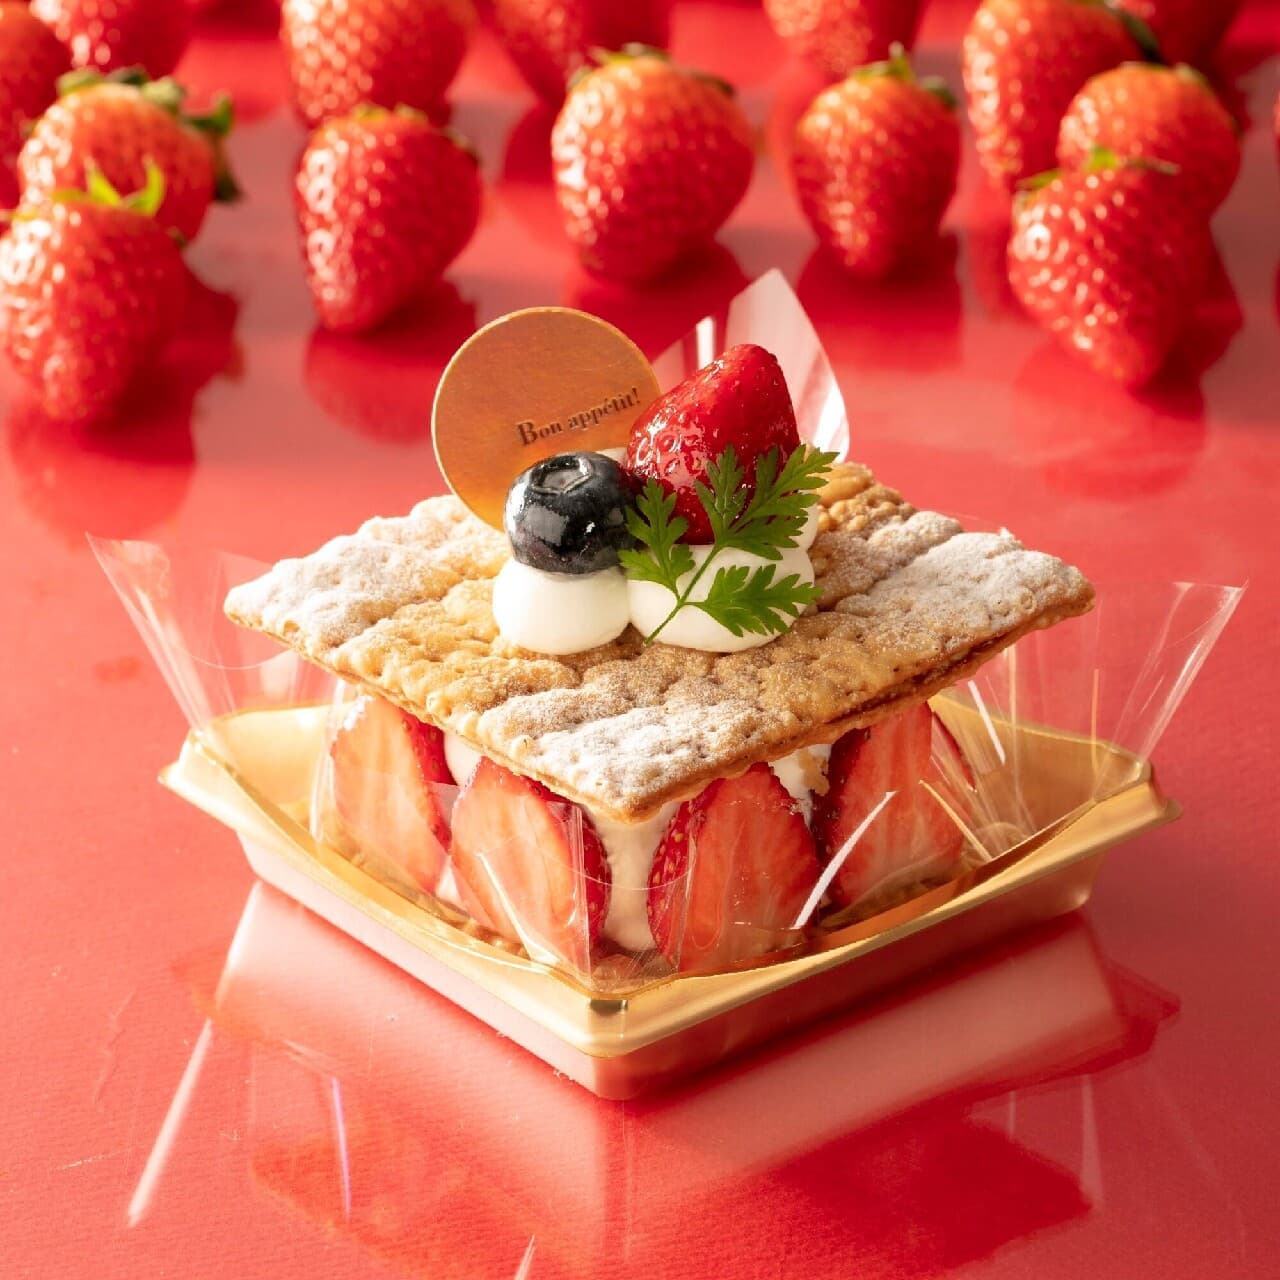 Chateraise "Strawberry Sweets"